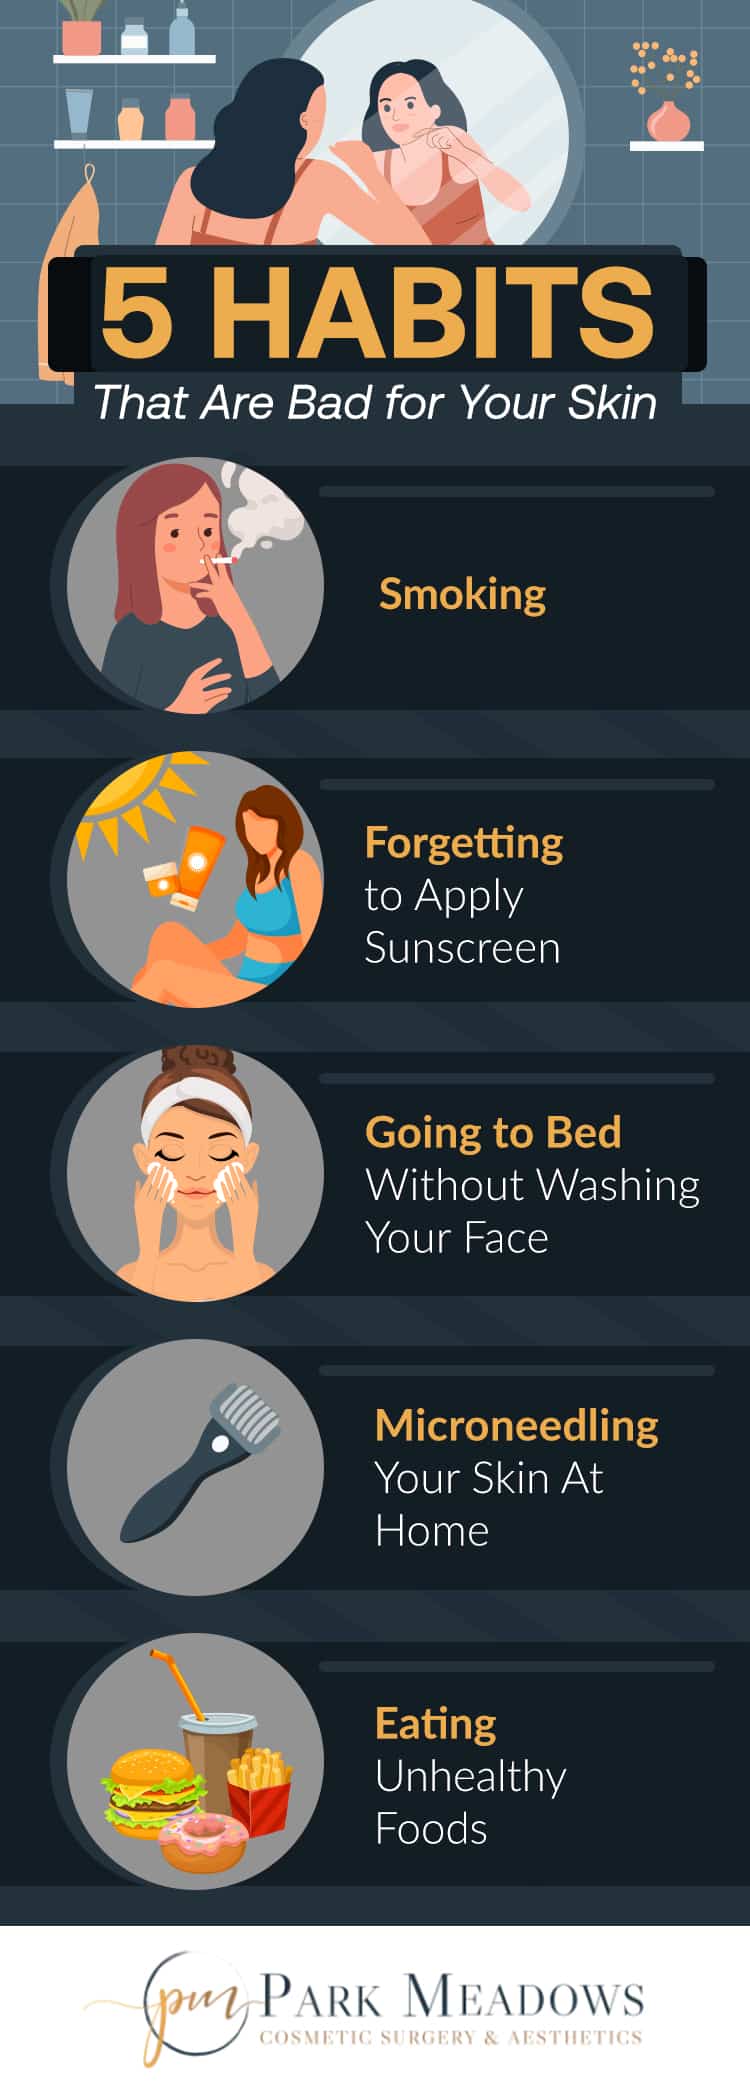 Habits that are bad for your skin infographic